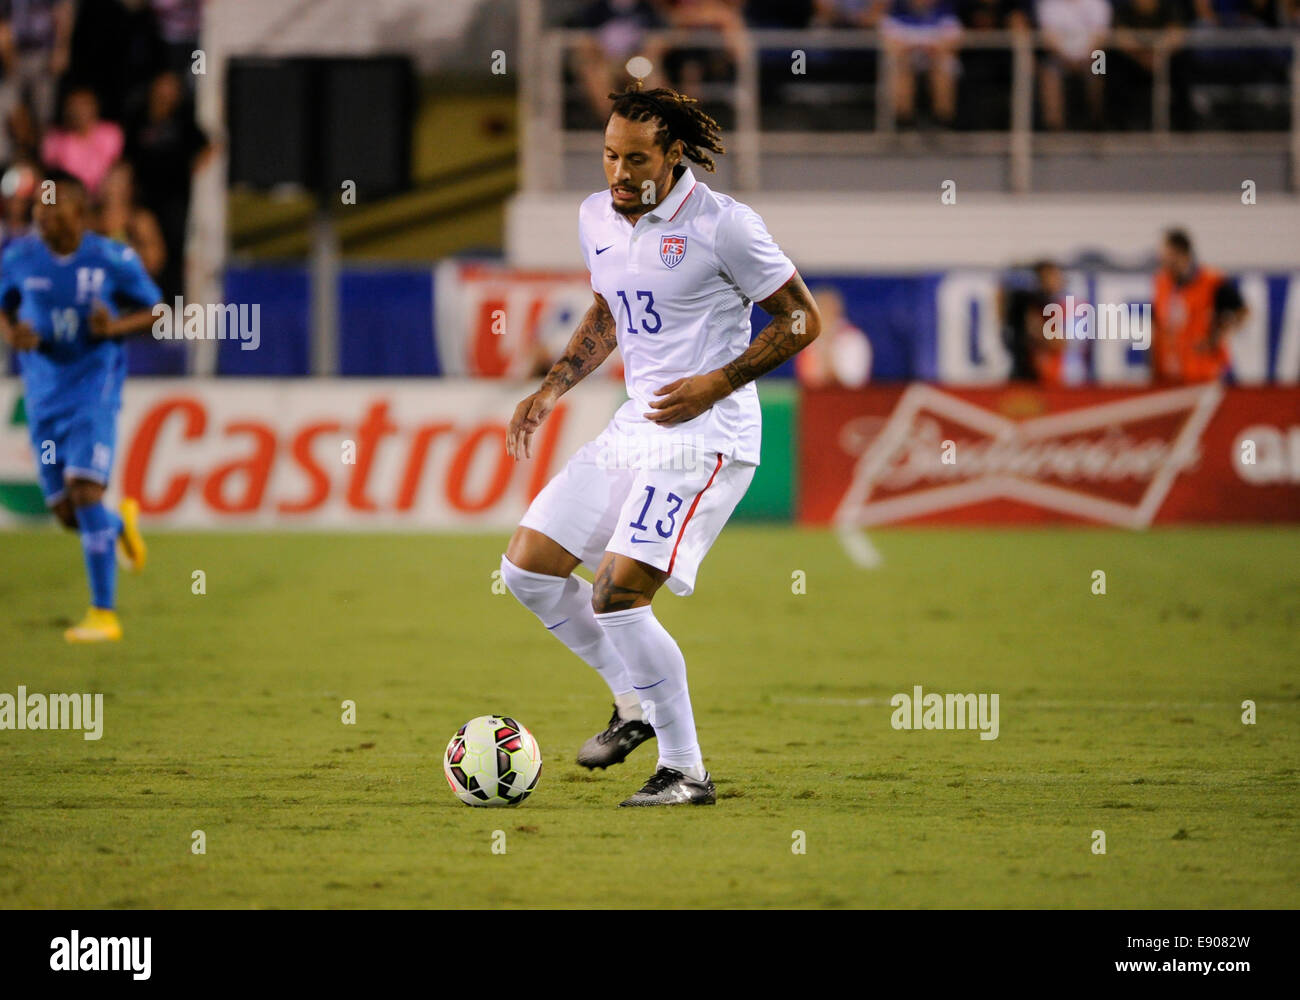 Florida, USA. 14th Oct, 2014. United States Midfielder Jermaine Jones (13) controls the ball during the international friendly between the US Men's National Team and Honduras at FAU Stadium in Boca Raton, Florida © Action Plus Sports/Alamy Live News Stock Photo